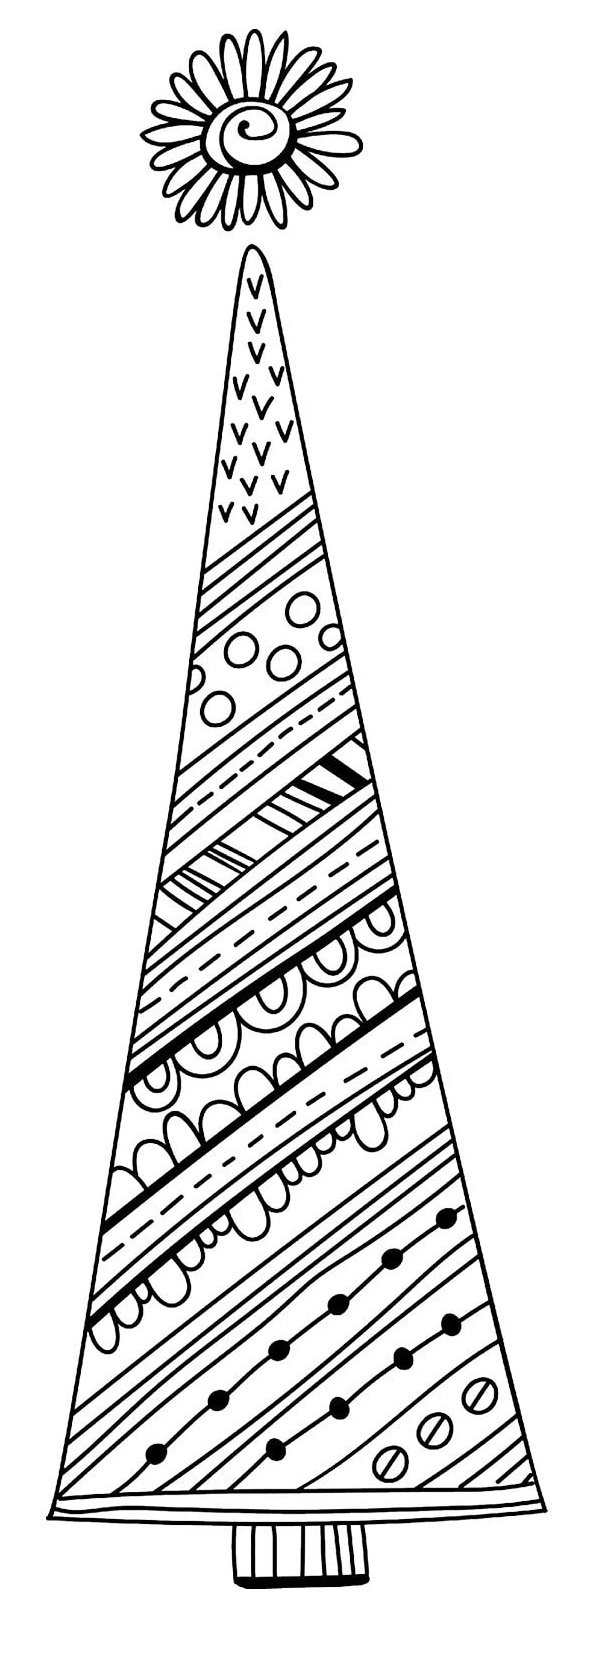 Tall Christmas Tree With Decorative Patterns